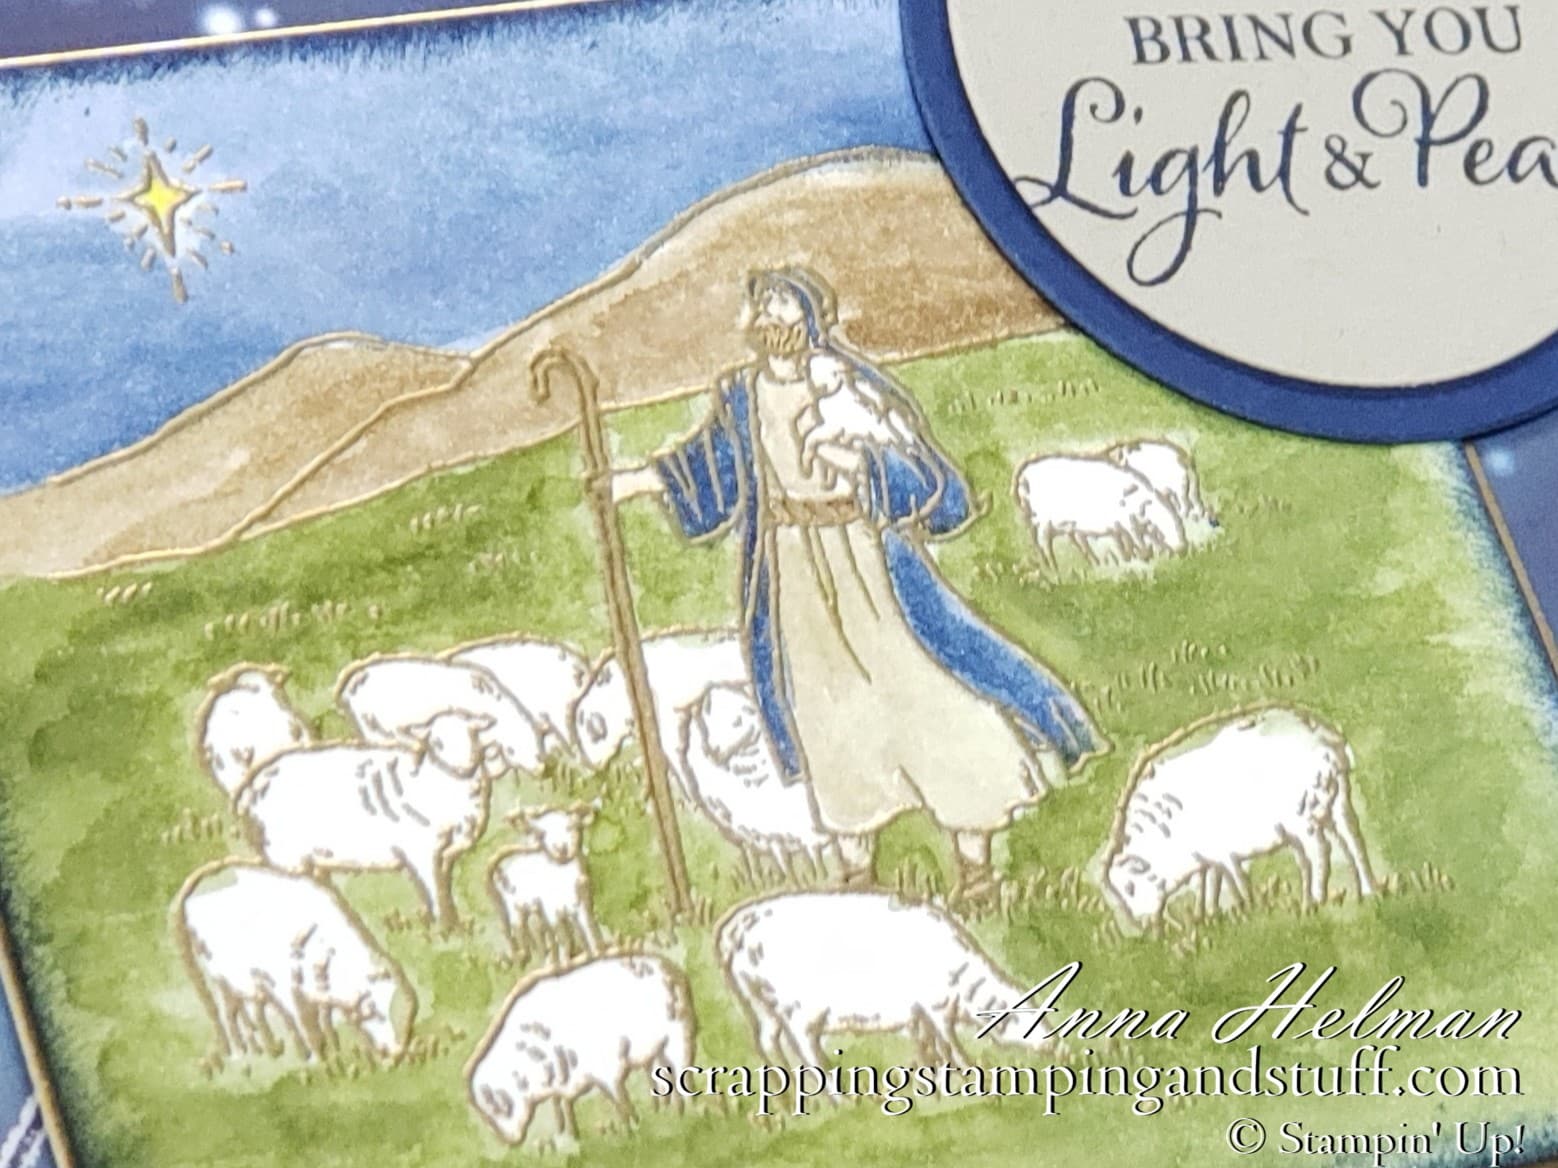 Shepherd Card Featuring Stampin Up Light & Peace